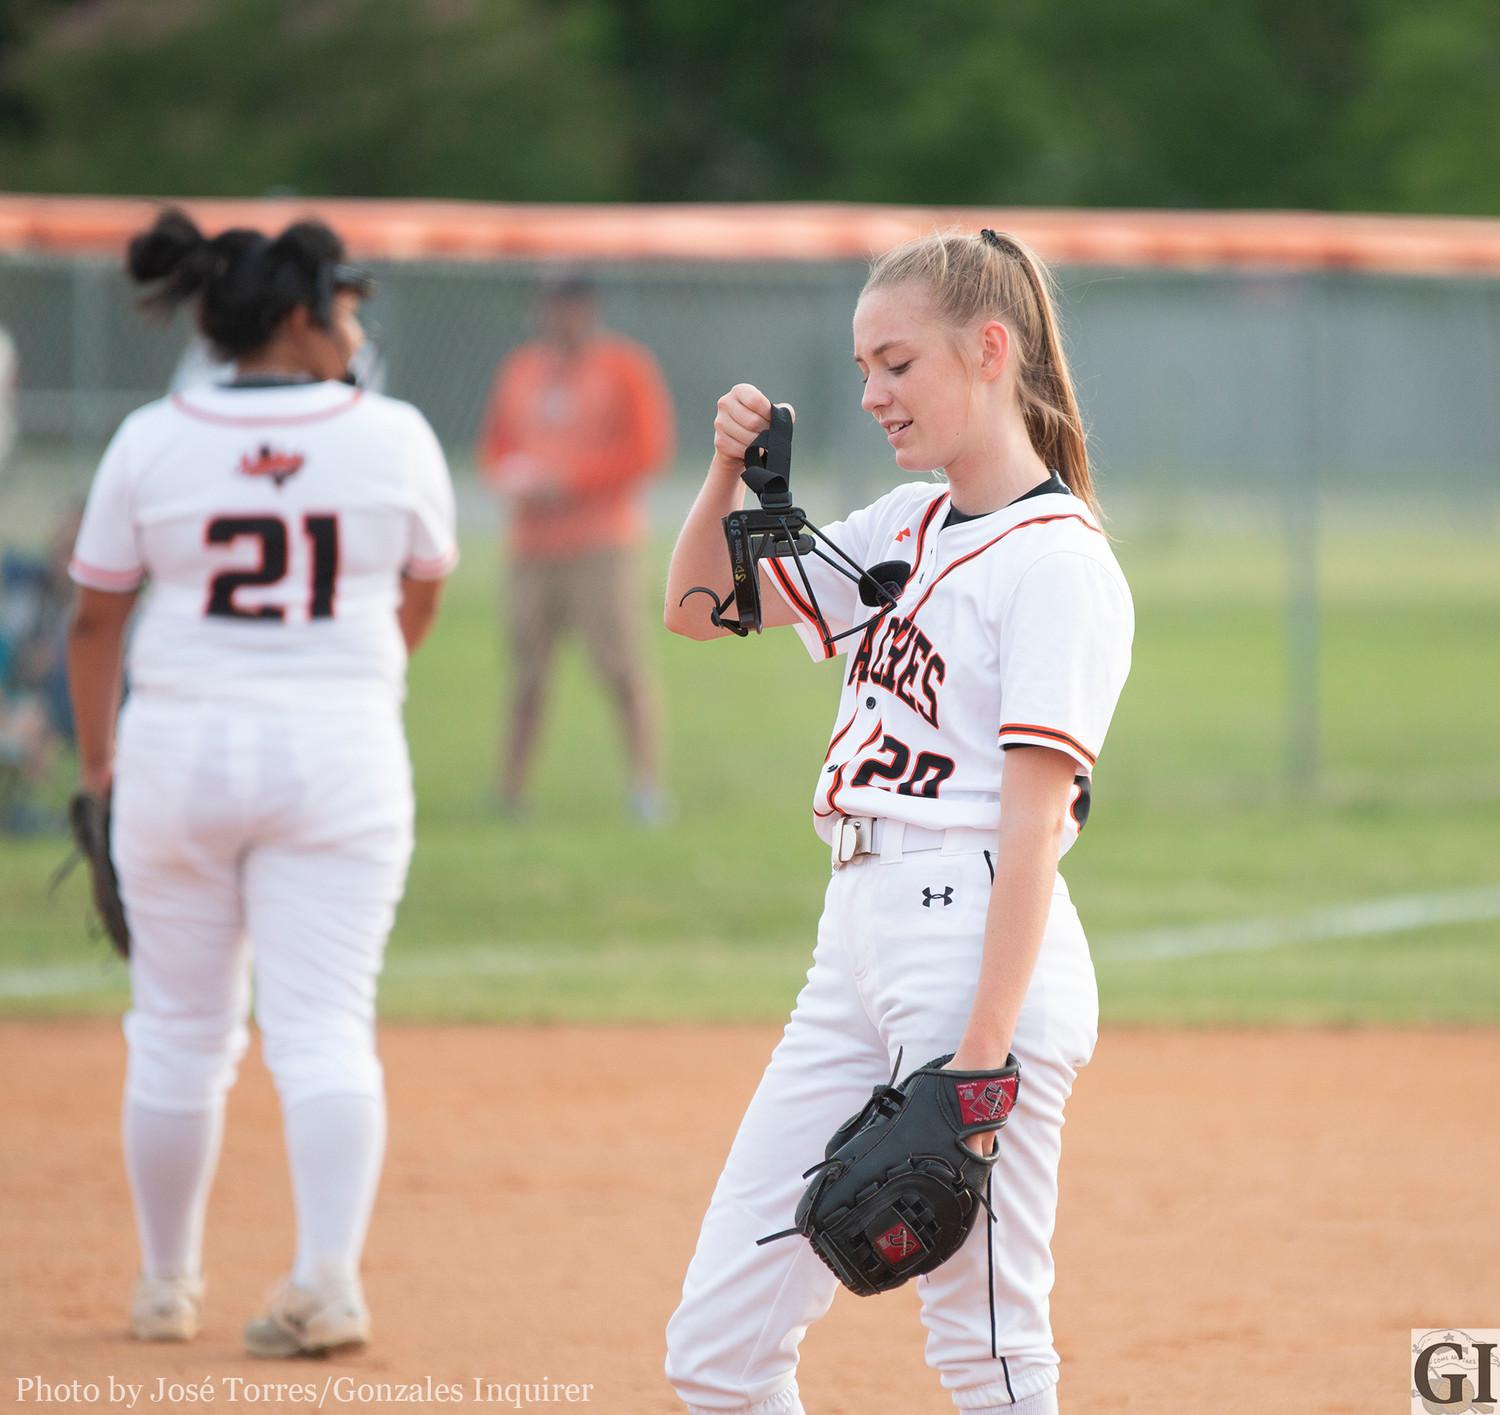 Freshman pitcher and second baseman Shelby Davis was named District 27-4A newcomer of the year.